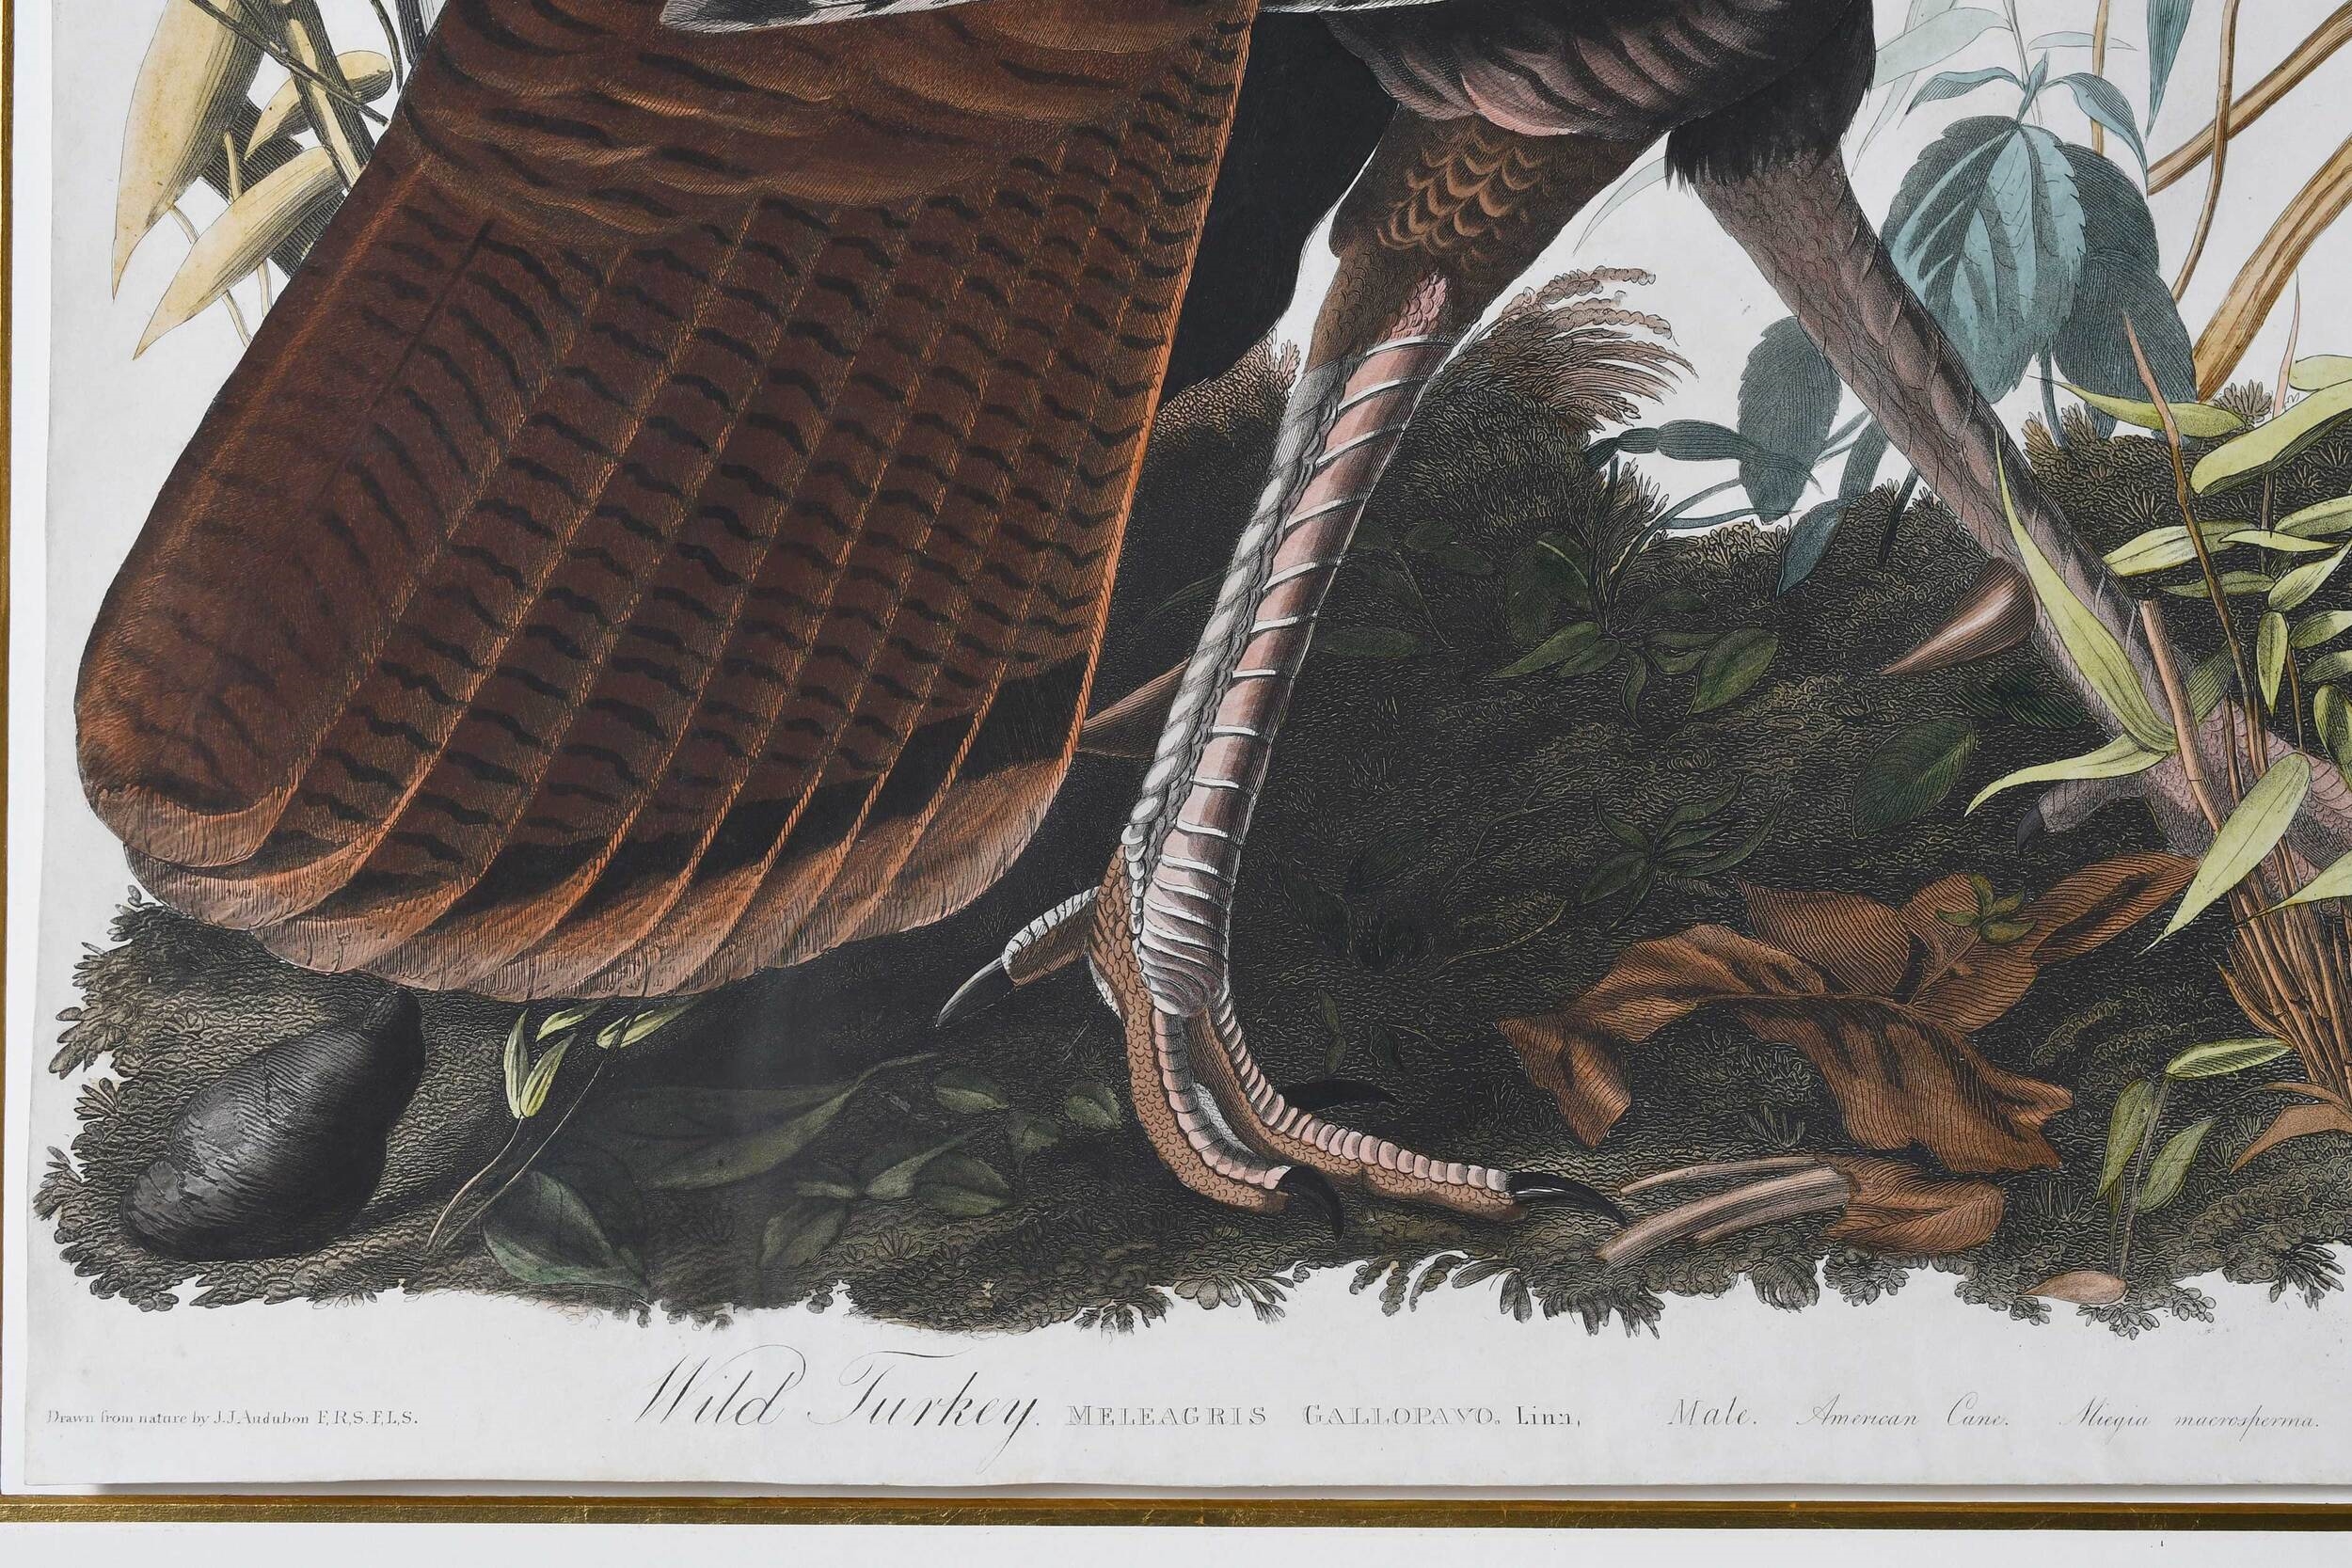 Artwork by John James Audubon, Wild Turkey, Meleagris Gallopavo. Linn, Male. American Cane. Miegia macrosperma, No.1 and Pl. 1 from The Birds of America, London, 1827-1838, Made of hand colored engraving with etching and aquatint on paper